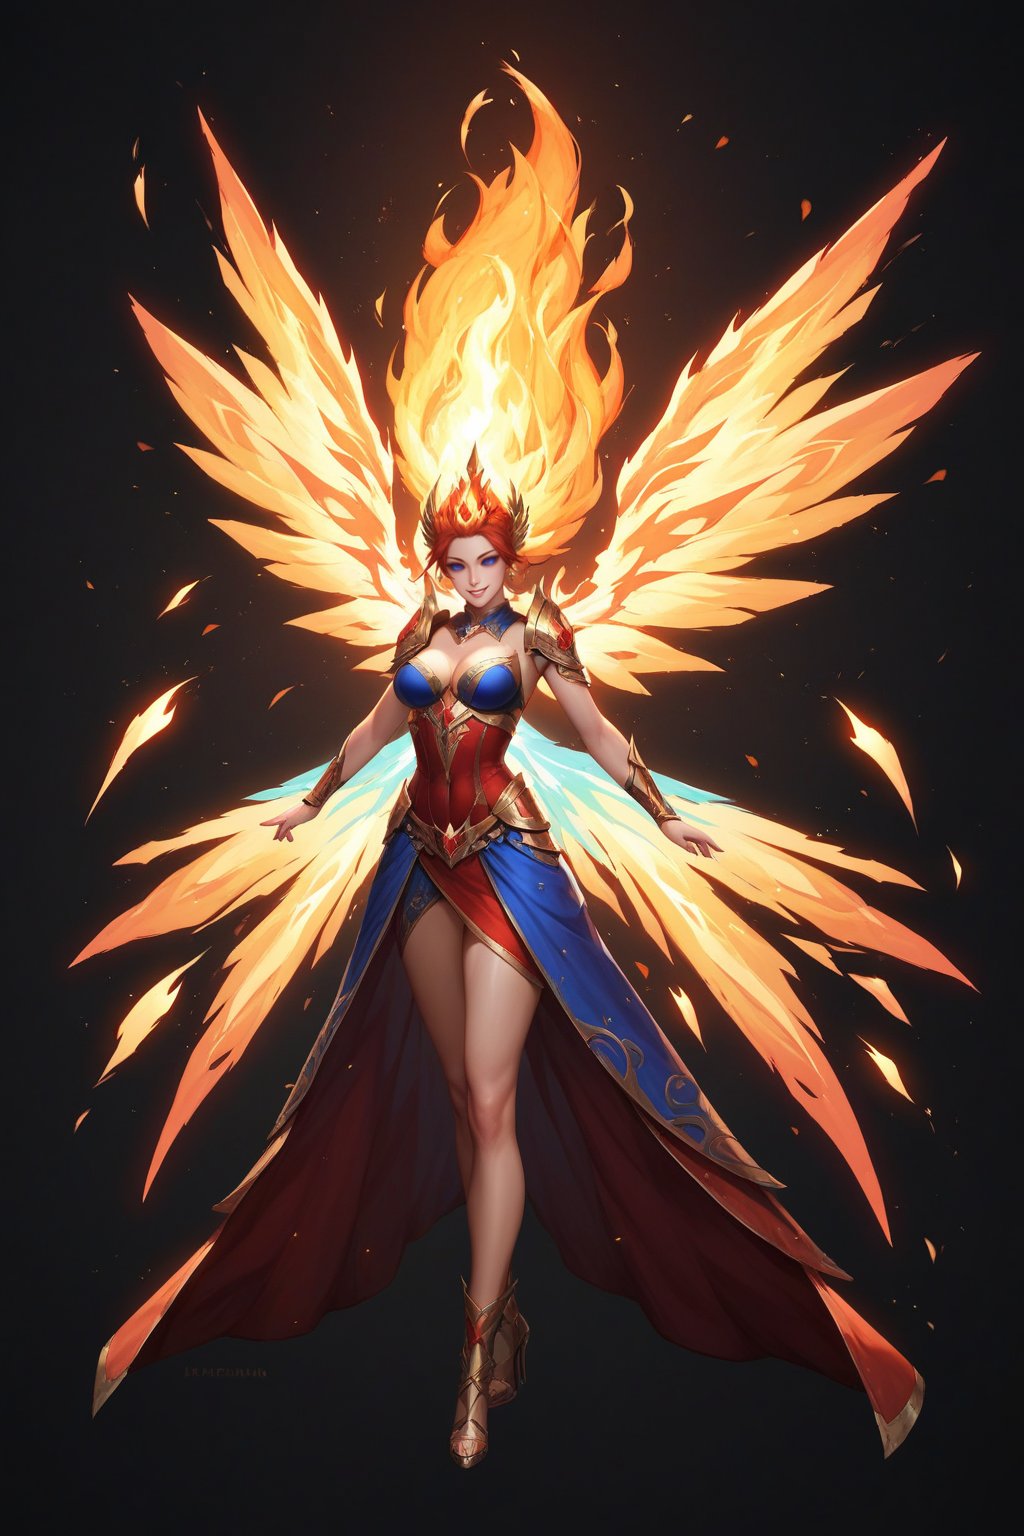 Score_9, Score_8_up, Score_7_up, Score_6_up, Score_5_up, Score_4_up, masterpiece, best quality,
BREAK
1girl, solo, full_body, black background, FuturEvoLabFlame, FuturEvoLabgirl,
fire wings, glowing embers, intense flames, dynamic fire effects, vibrant orange and red, fiery aura, detailed fire particles, flame burst, dramatic lighting, ethereal glow